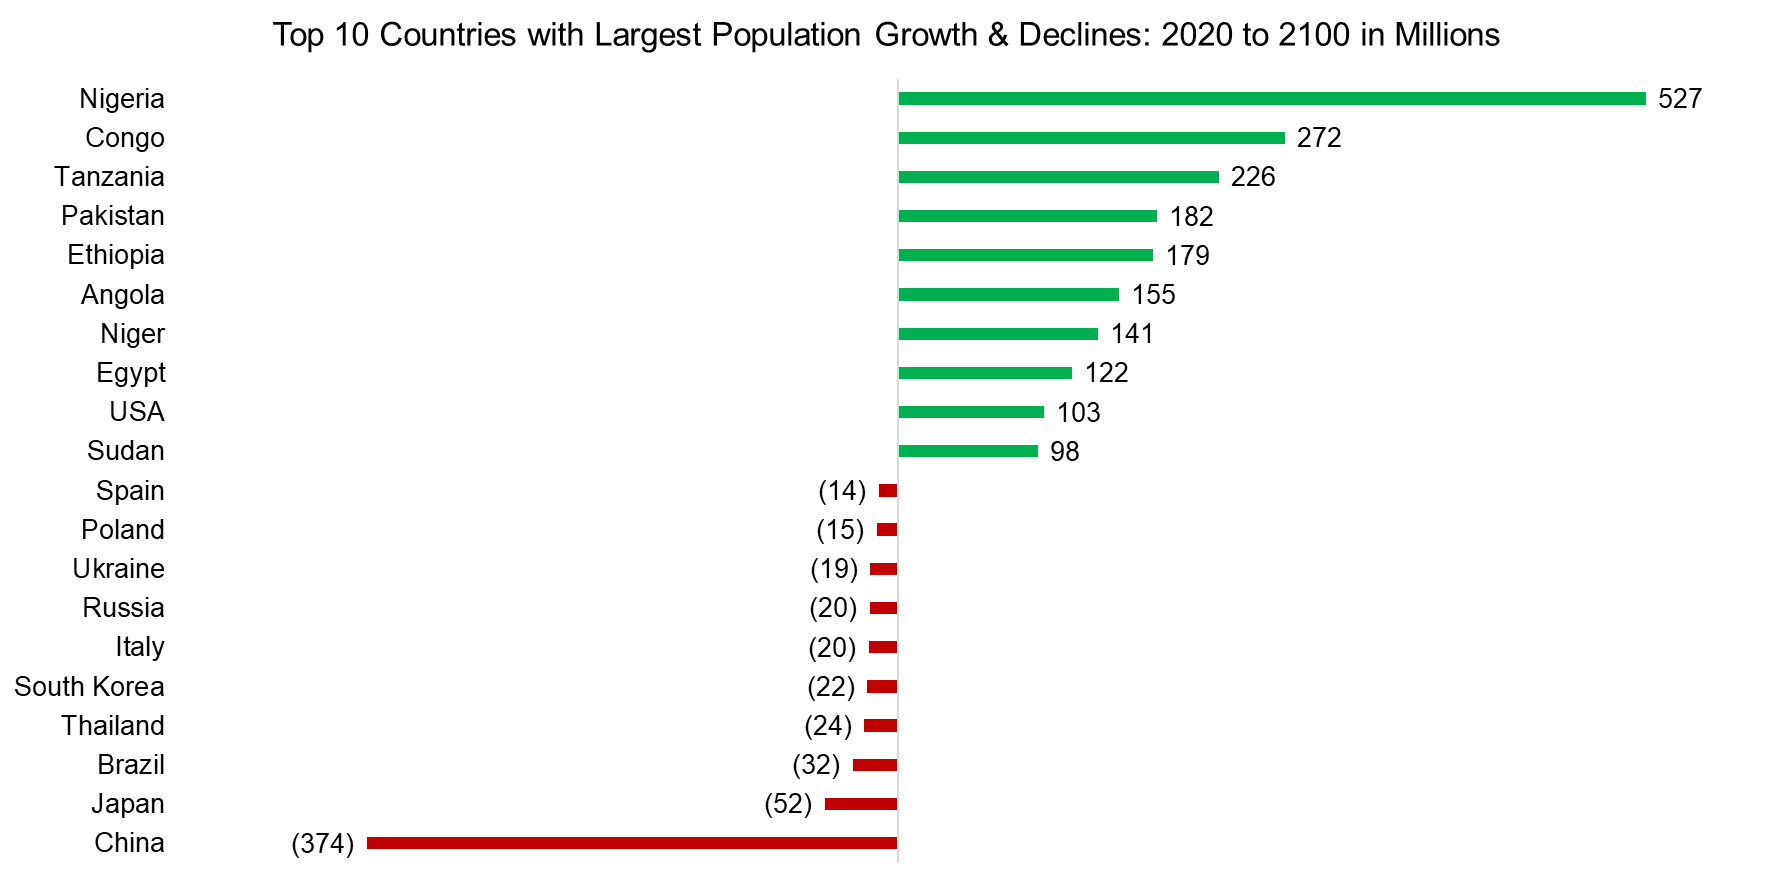 Top 10 Countries with Largest Population Growth & Declines 2020 to 2100 in Millions